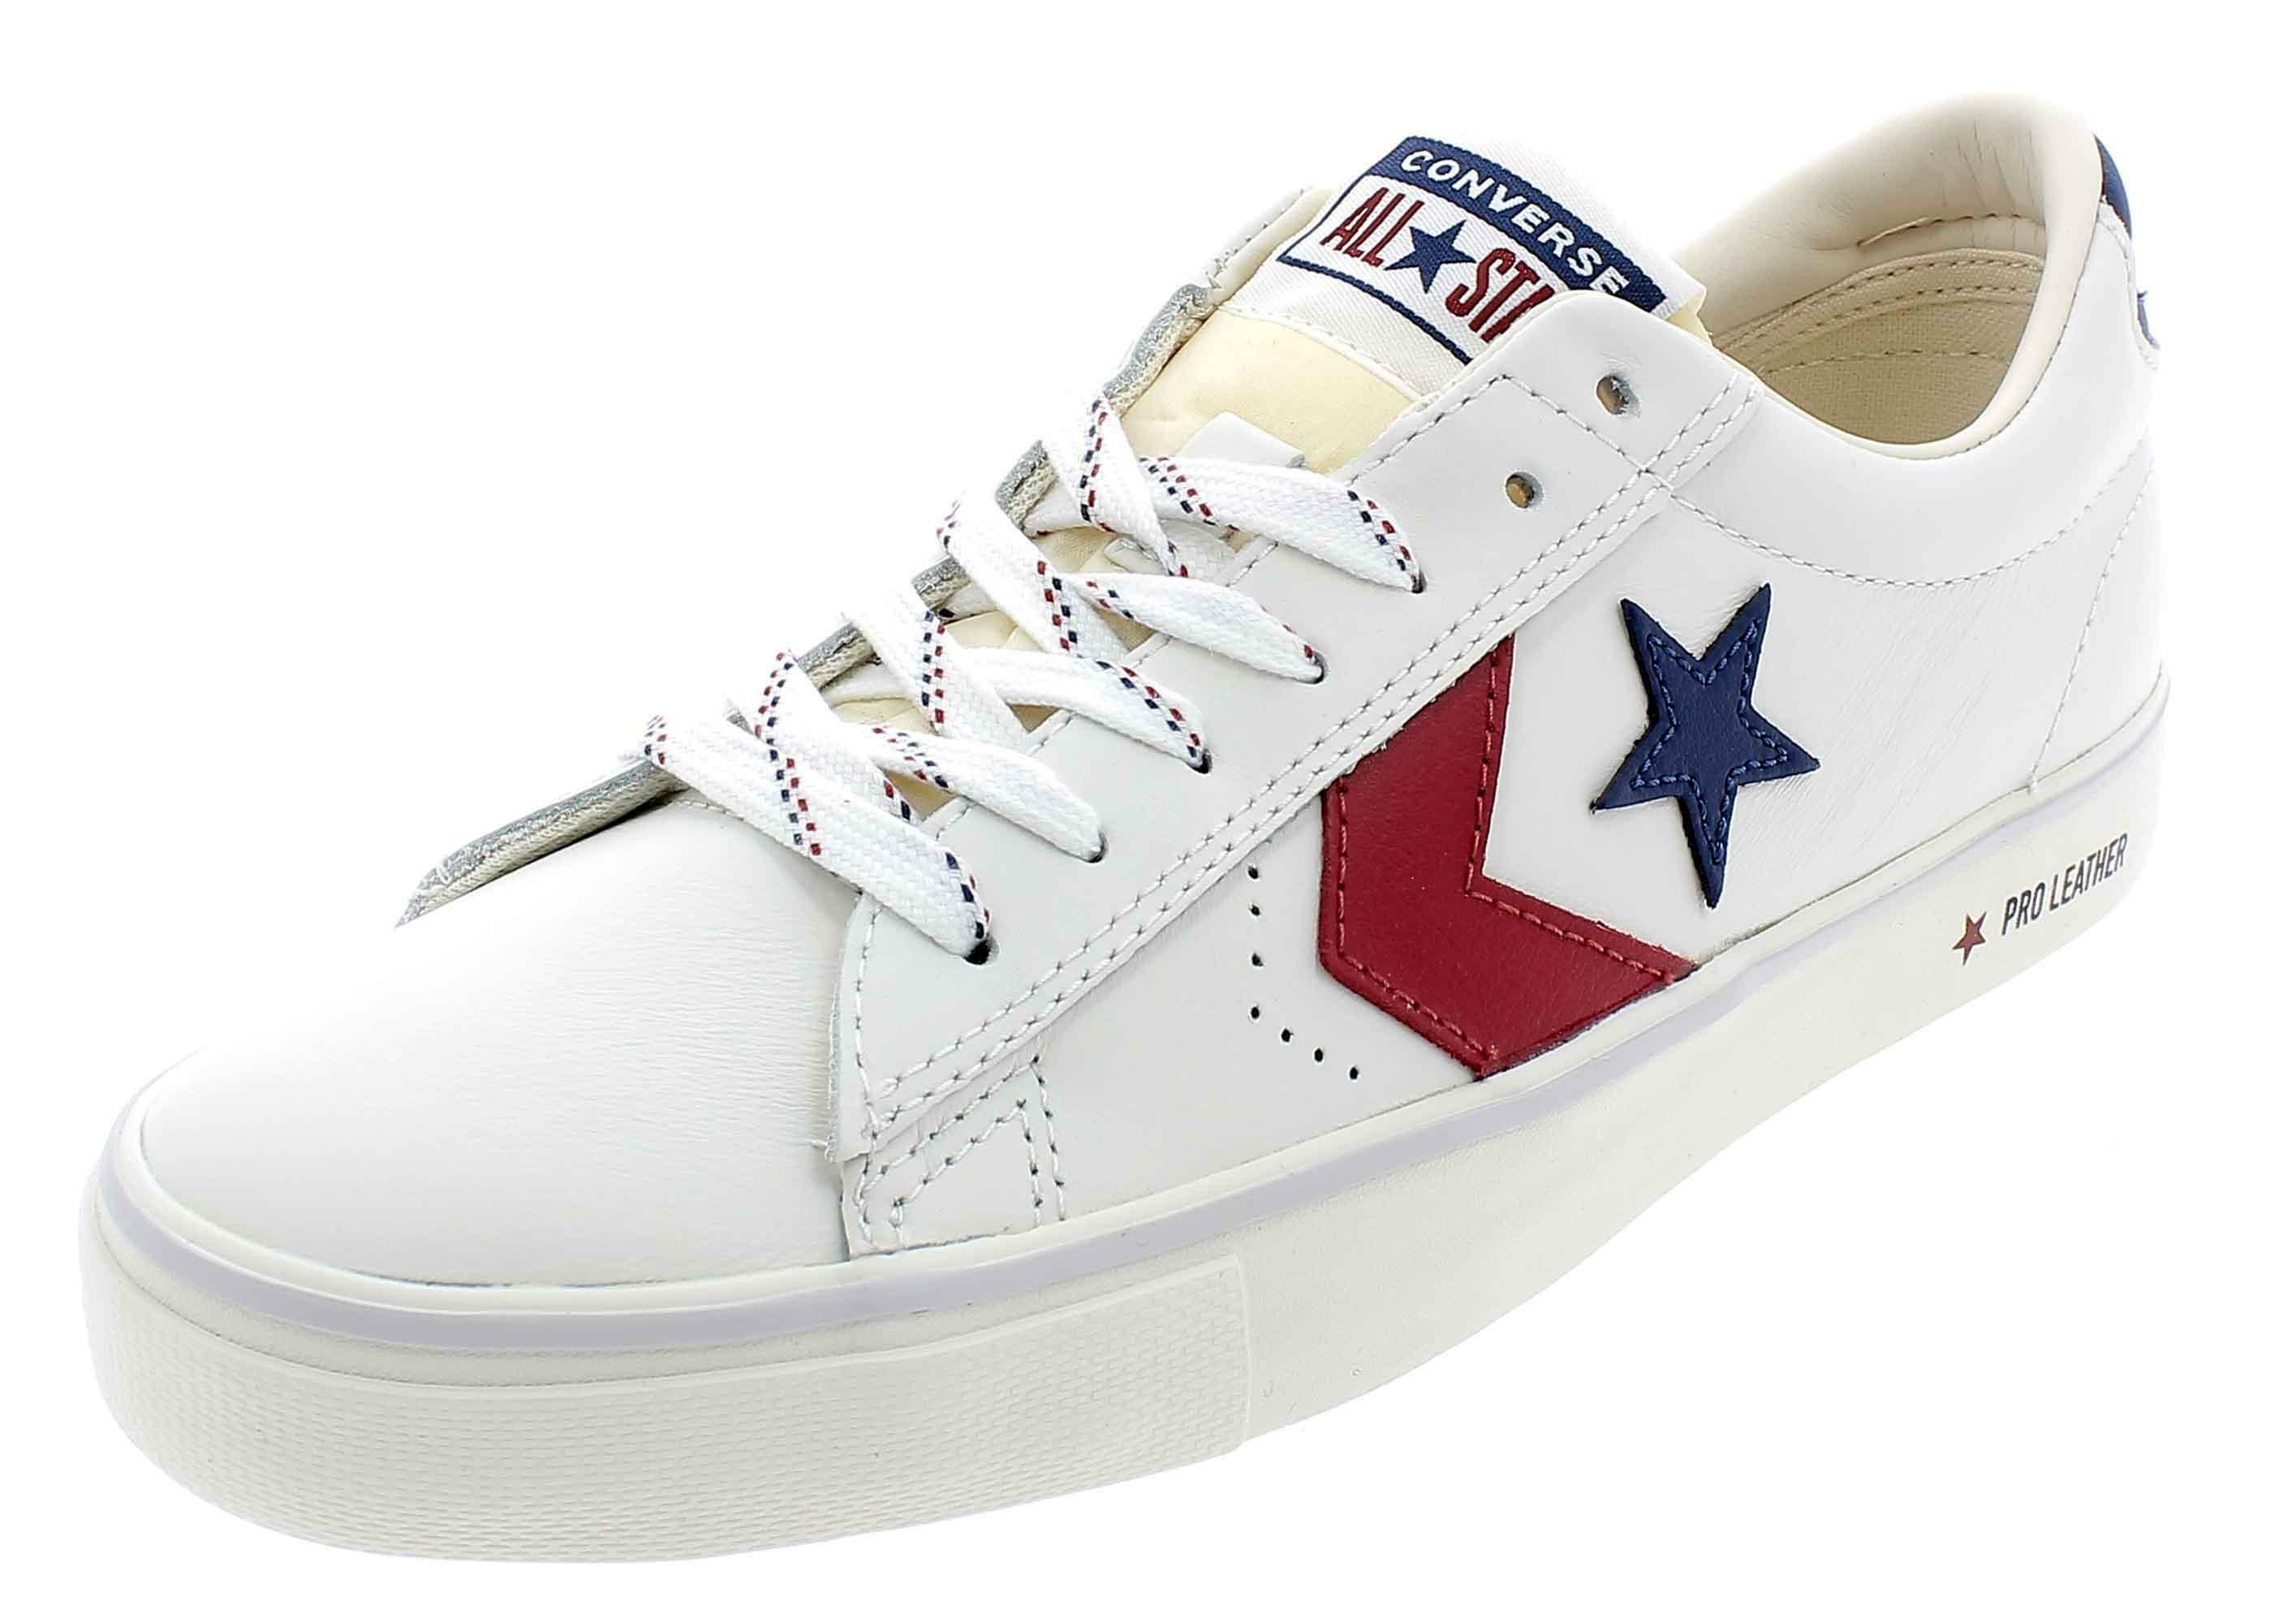 converse all star pro leather vulc ox